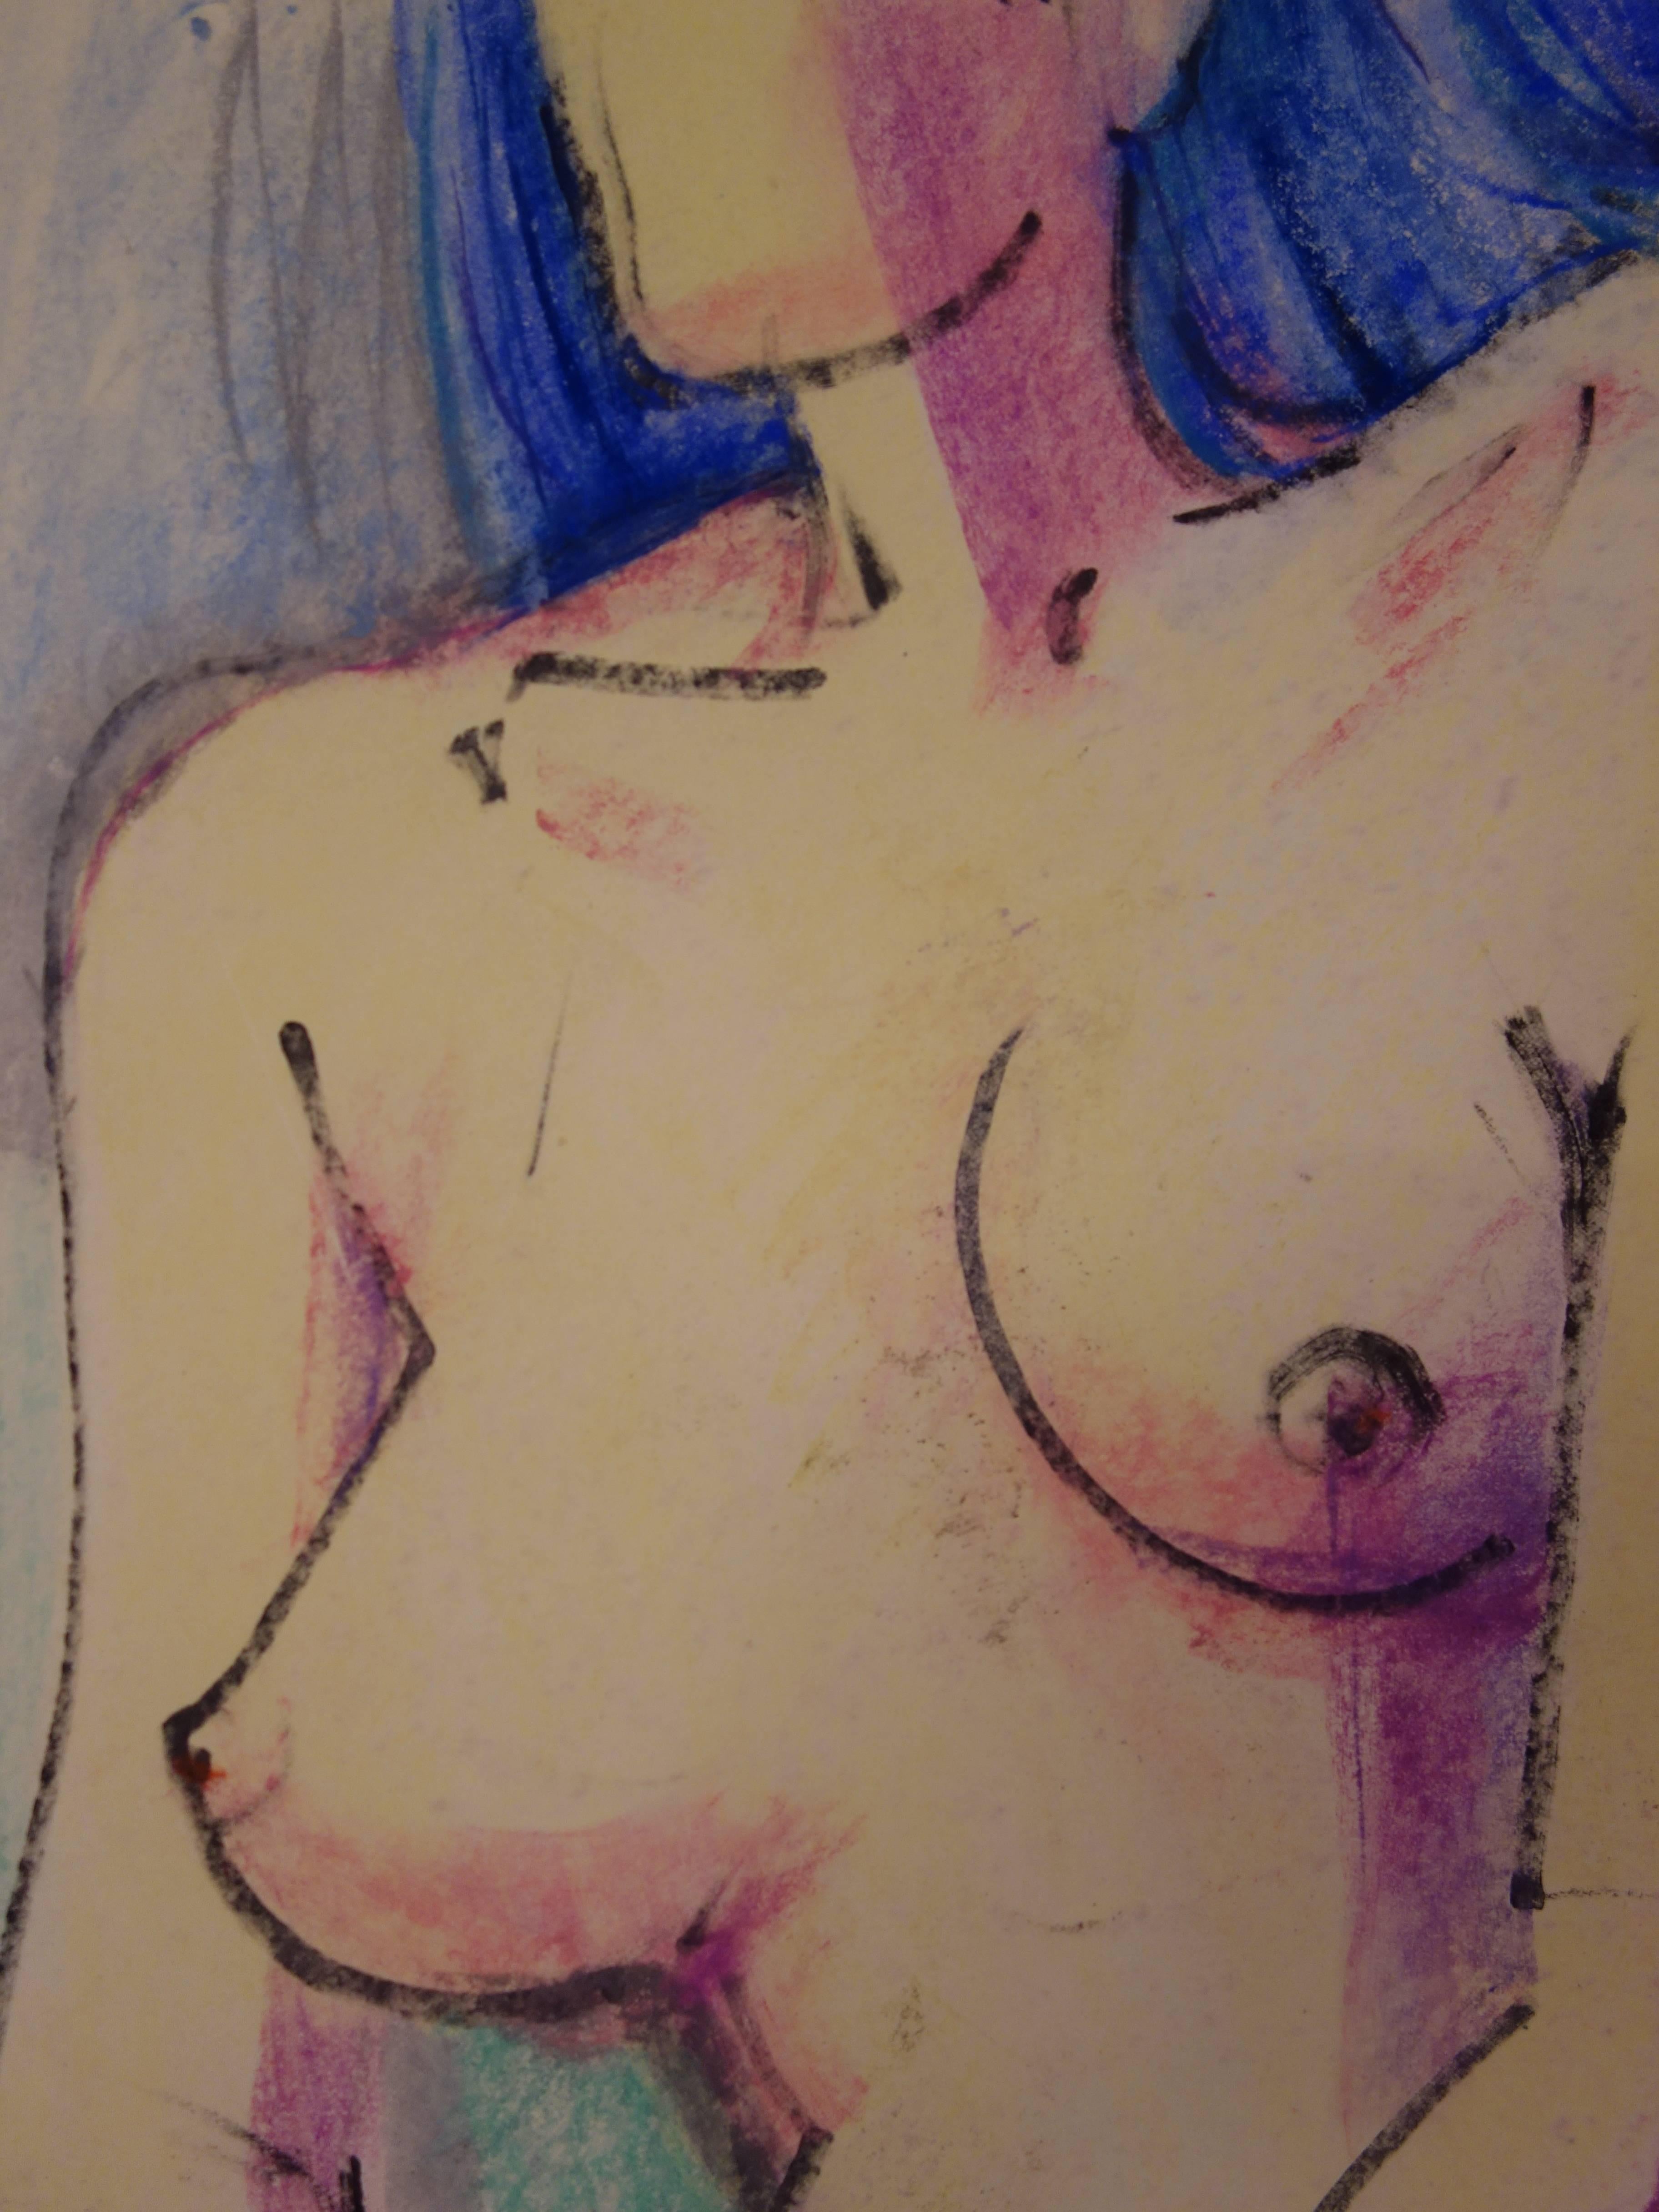 Gaston COPPENS (1909 - 2002)
Pink and Blue Nude

Original charcoal drawing
Stamp signature of the artist in the bottom left corner
Stamp of the artist on the back
On wove paper 48 x 37 cm (c 19 x 15 inch)

Excellent condition

Gaston Coppens studied